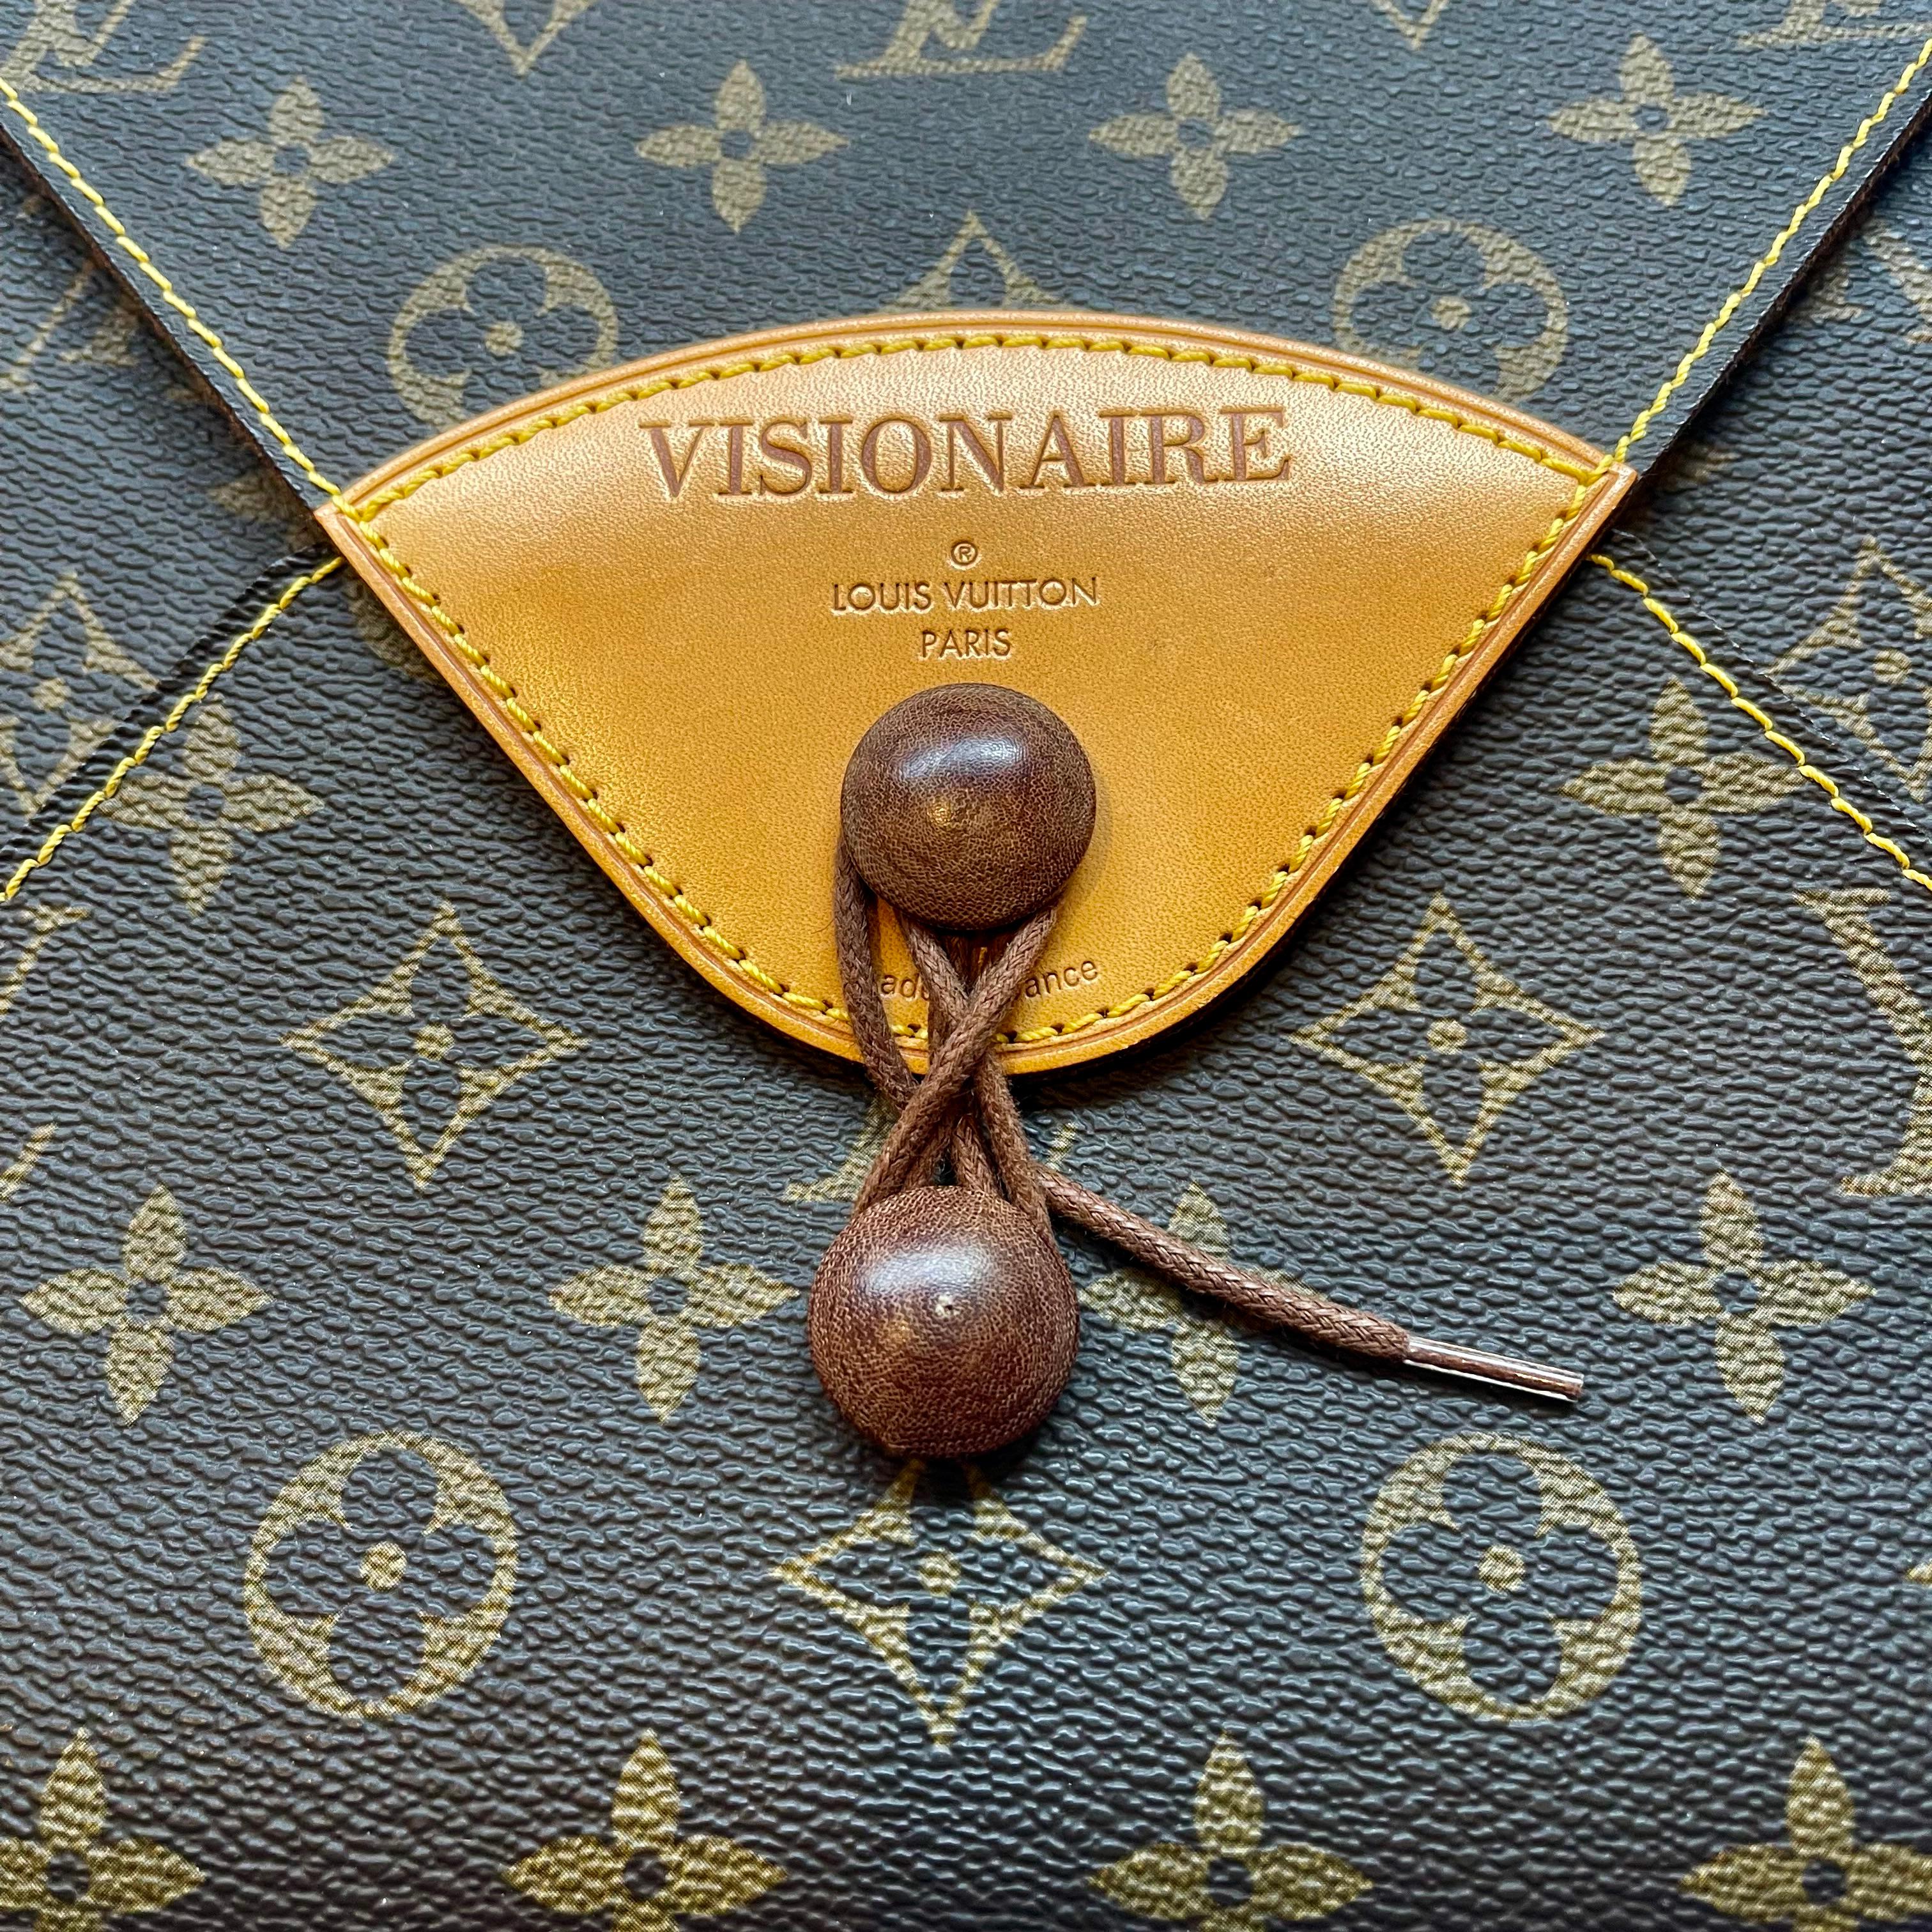 Part of a limited edition of 2,500 hand-numbered copies, issue 18 of the highly collectible Visionaire magazine was the first of their issues to be focused fully on fashion throughout. Held in a specially-made brown leather case from Louis Vuitton,